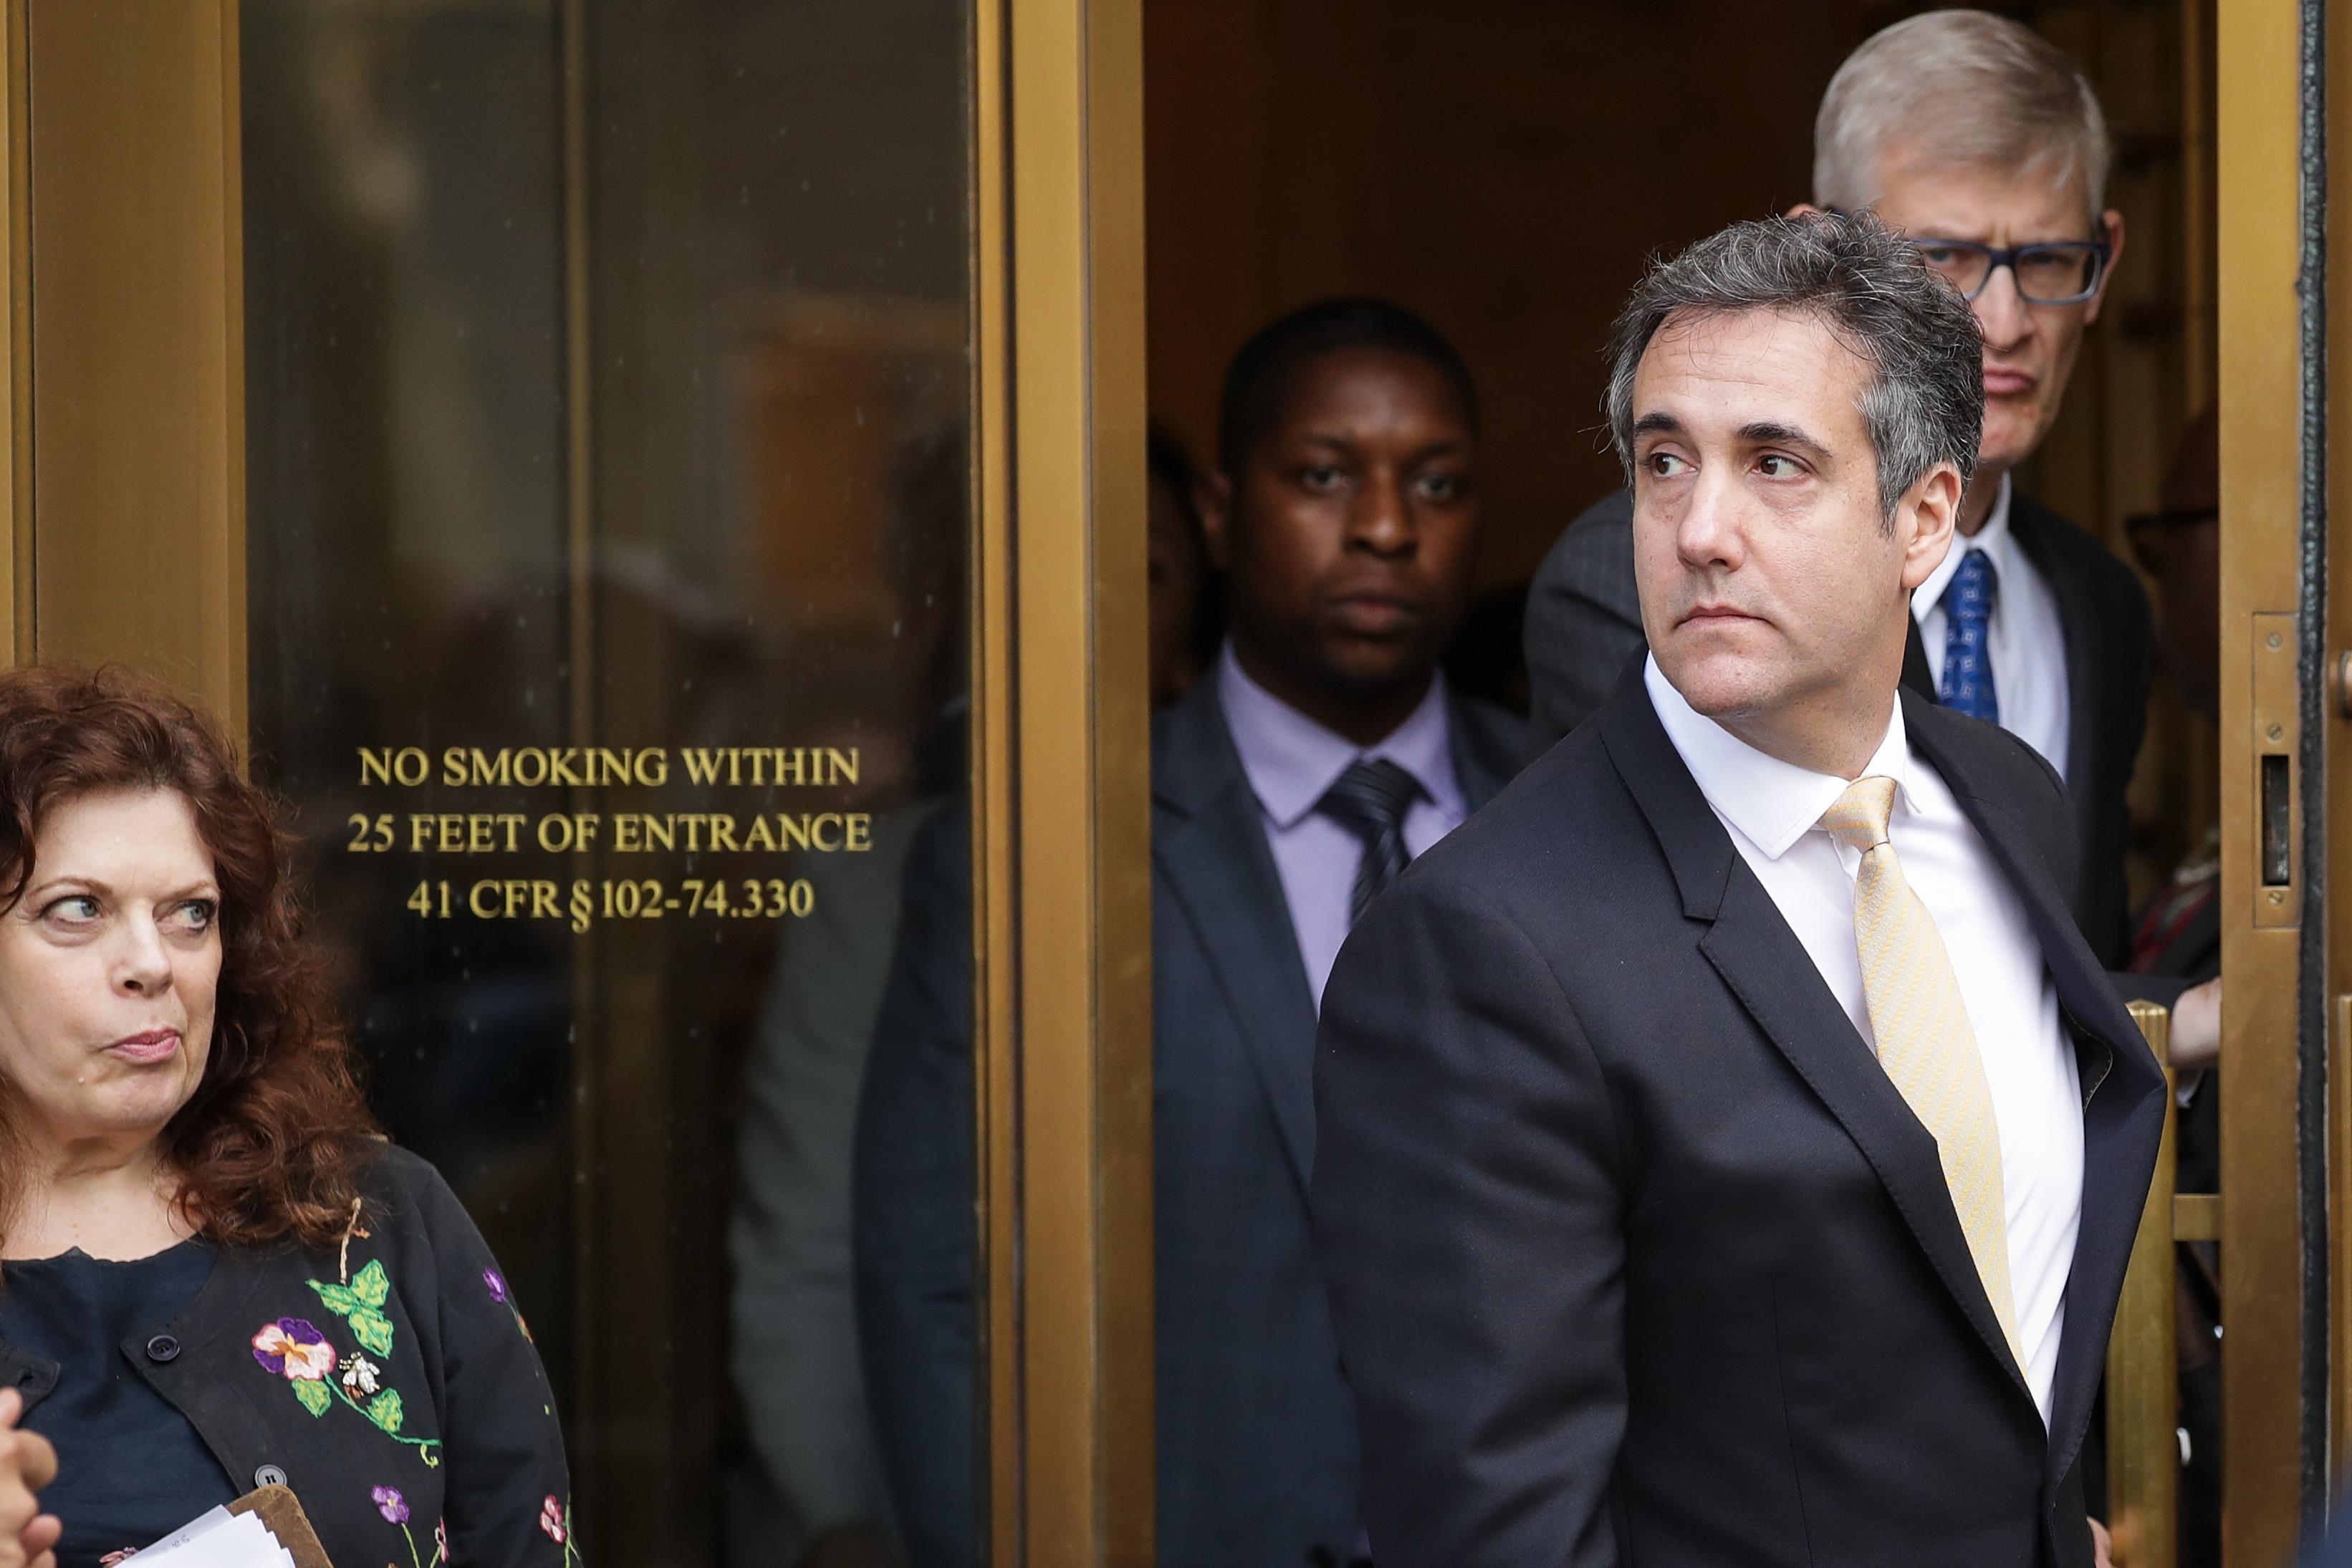 NEW YORK, NY - AUGUST 21: Michael Cohen, President Donald Trump's former personal attorney and fixer, exits federal court, August 21, 2018 in New York City. Cohen reached an agreement with prosecutors, pleading guilty to charges involving bank fraud, tax fraud and campaign finance violations. (Photo by Drew Angerer/Getty Images)